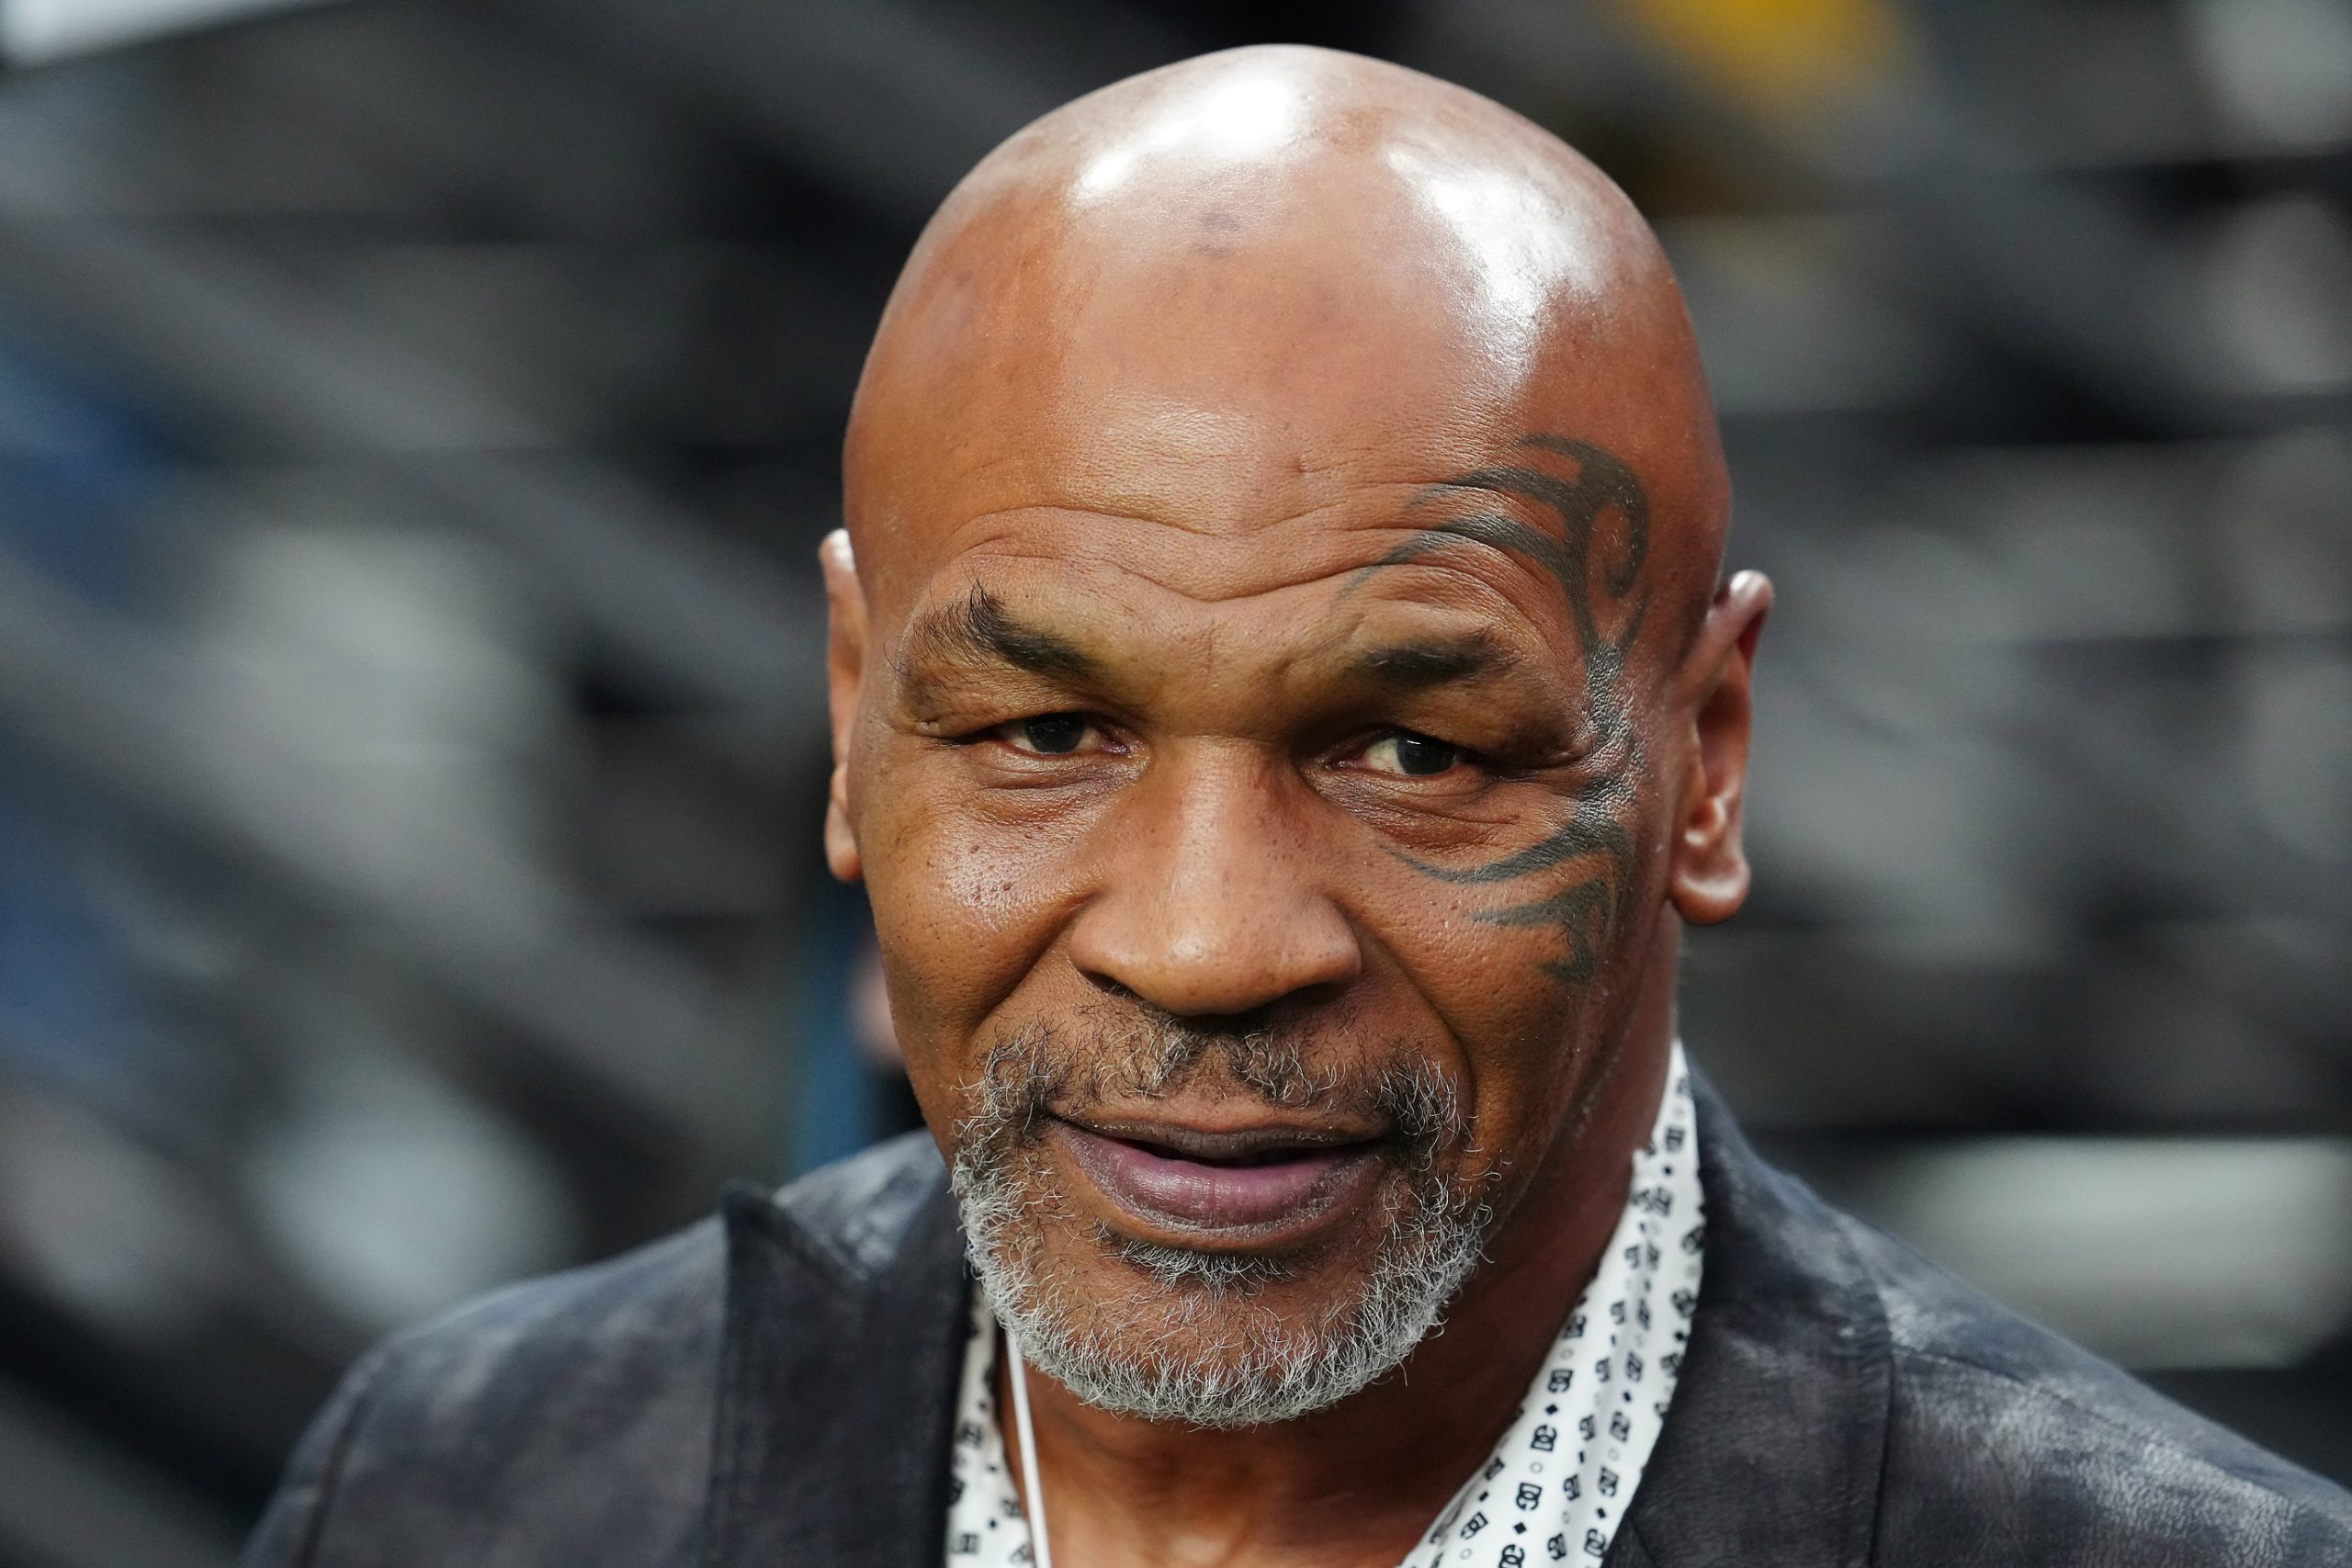 Sep 24, 2023; Paradise, Nevada, USA; Mike Tyson poses for a photo on the sidelines before the start of a game between the Las Vegas Raiders and the Pittsburgh Steelers at Allegiant Stadium. Mandatory Credit: Stephen R. Sylvanie-USA TODAY Sports